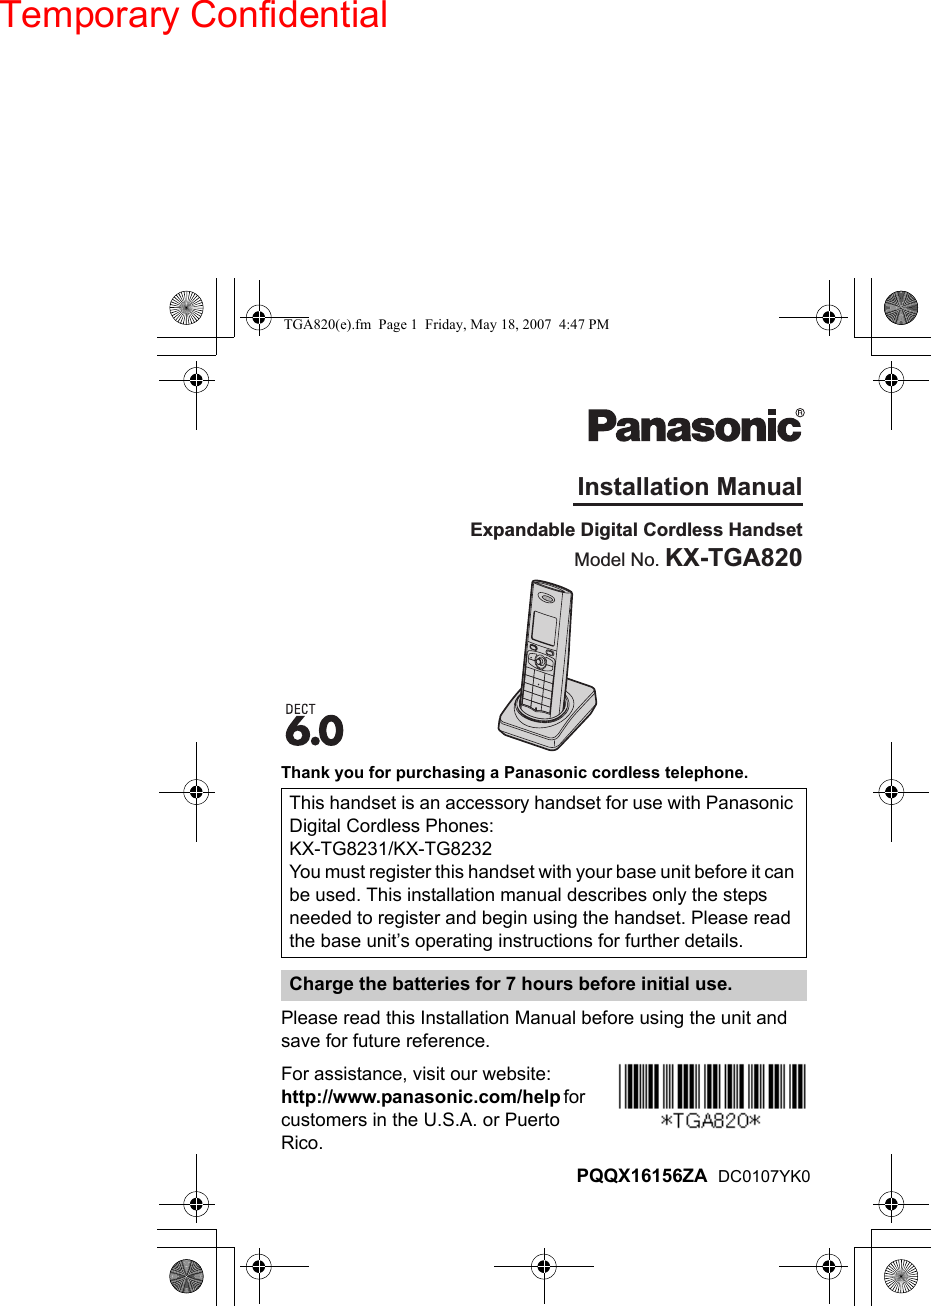 Thank you for purchasing a Panasonic cordless telephone.Please read this Installation Manual before using the unit and save for future reference.For assistance, visit our website:http://www.panasonic.com/help for customers in the U.S.A. or Puerto Rico.This handset is an accessory handset for use with Panasonic Digital Cordless Phones: KX-TG8231/KX-TG8232You must register this handset with your base unit before it can be used. This installation manual describes only the steps needed to register and begin using the handset. Please read the base unit’s operating instructions for further details.Charge the batteries for 7 hours before initial use.Expandable Digital Cordless HandsetModel No. KX-TGA820Installation ManualPQQX16156ZA  DC0107YK0TGA820(e).fm  Page 1  Friday, May 18, 2007  4:47 PMTemporary Confidential